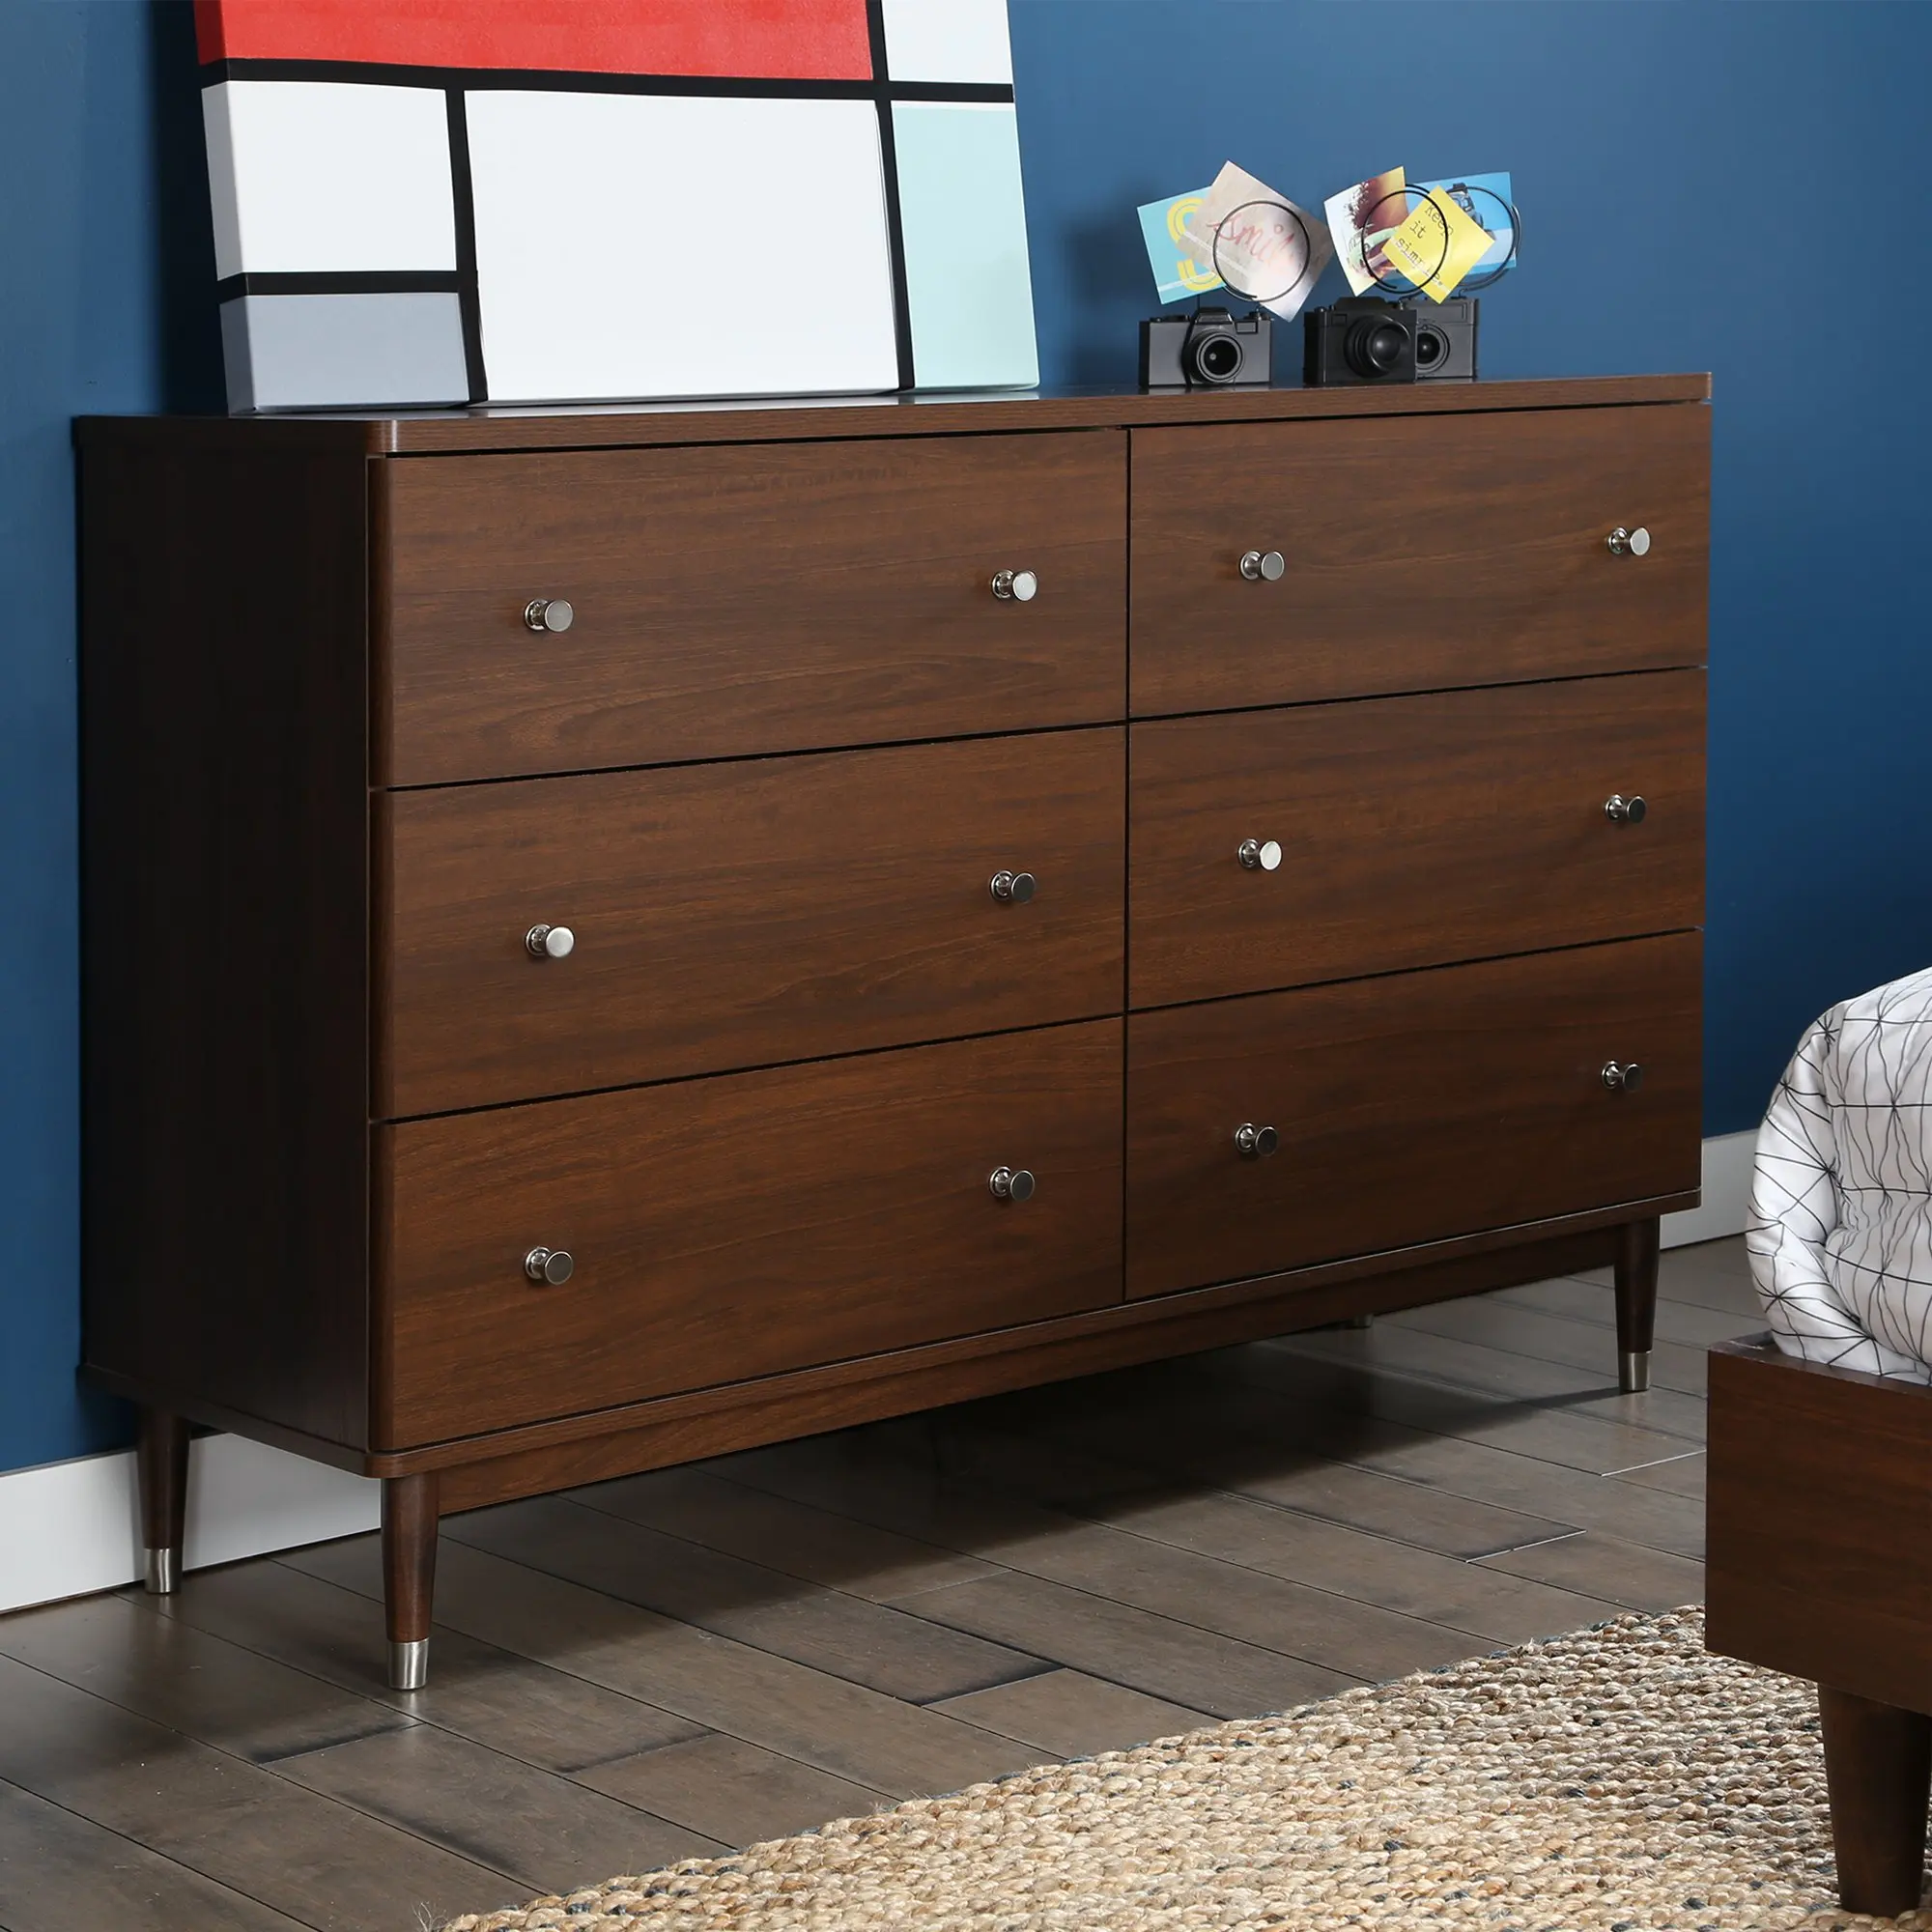 313.49. South Shore Olly Mid-Century Modern 6 Drawer Double Dresser, Brown ...